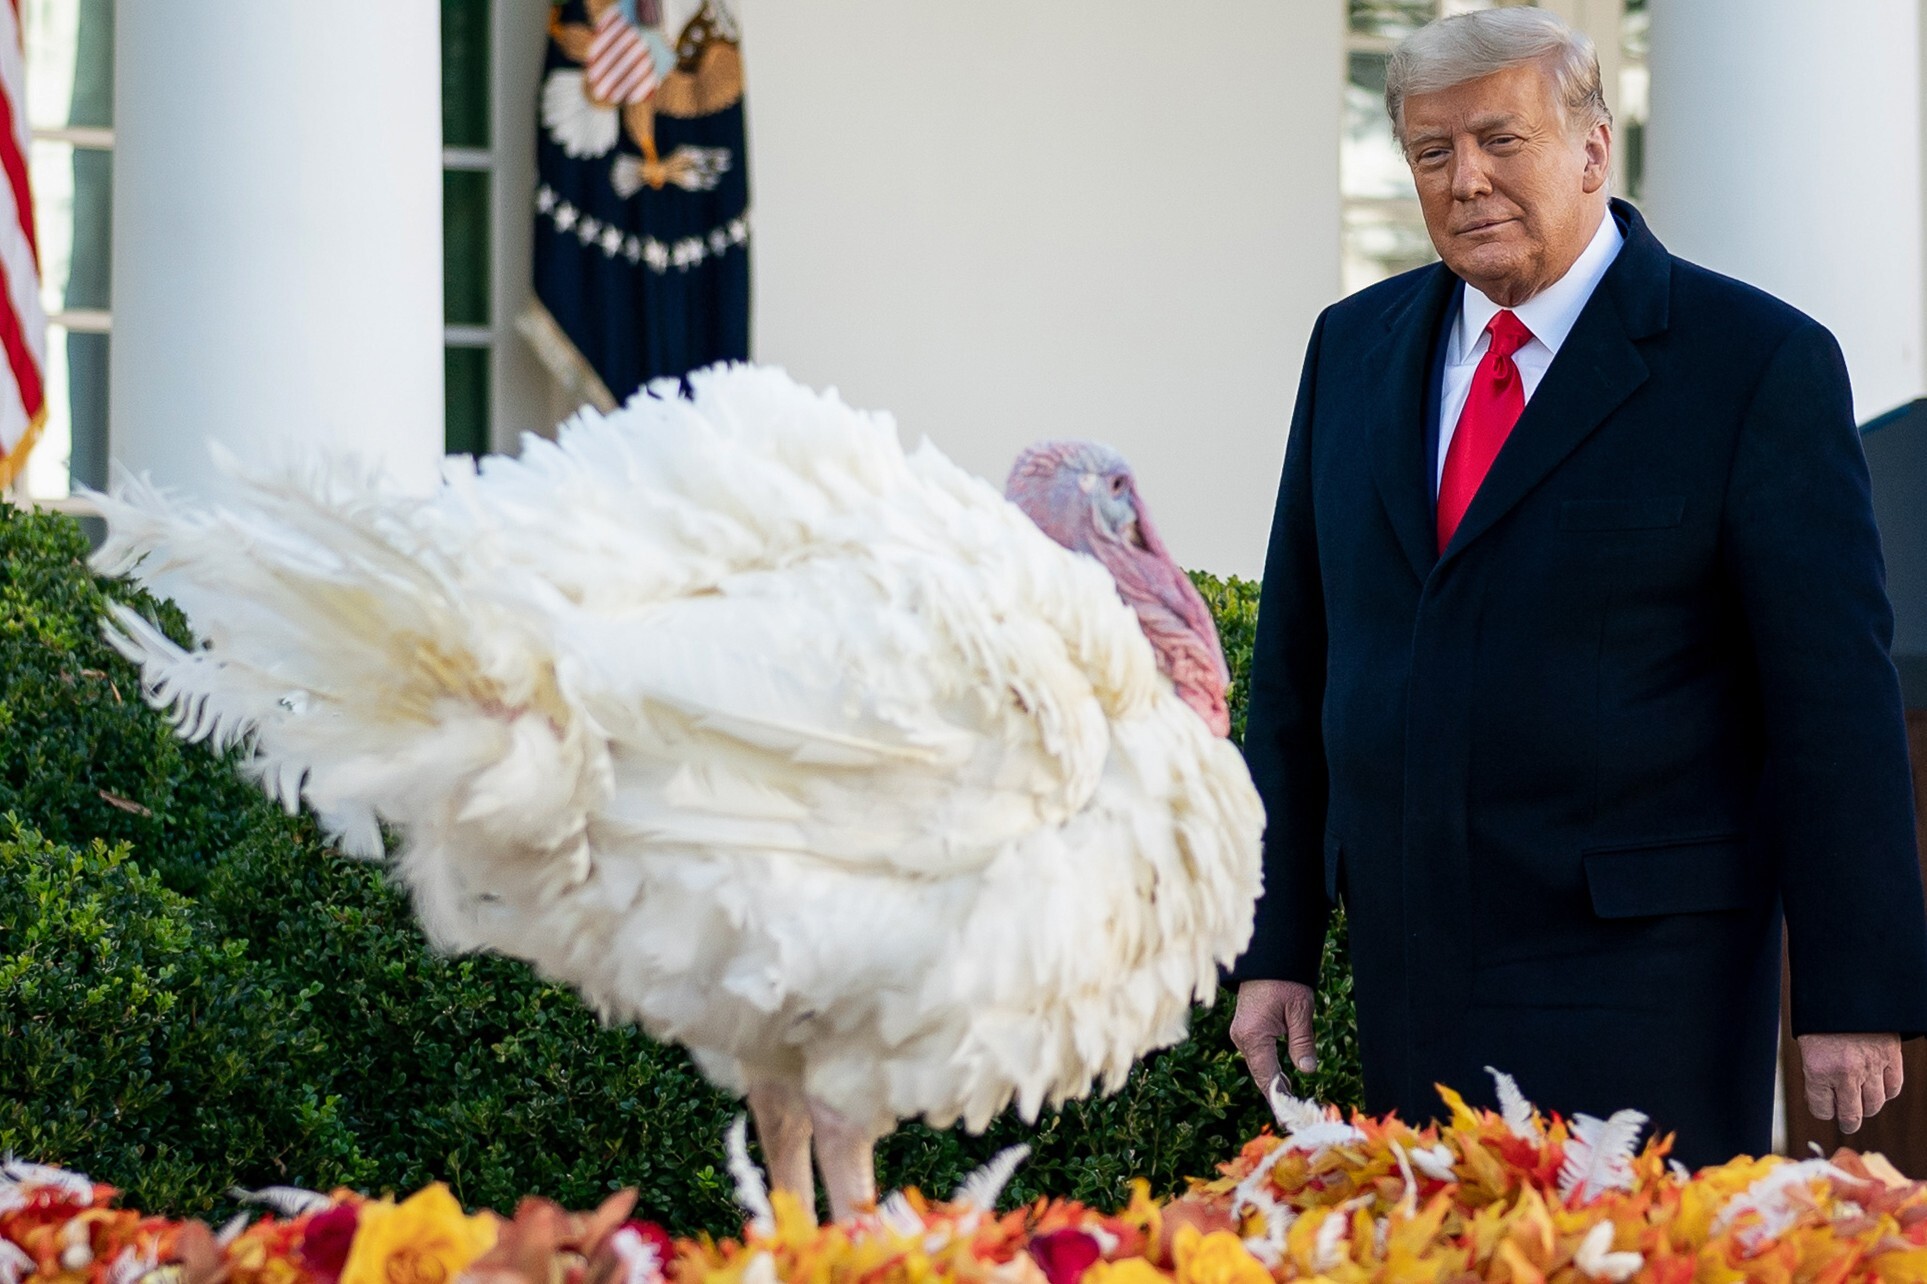 US President Donald Trump pardons a turkey at the White House, as part of an annual Thanksgiving presidential ritual. Photo: DPA